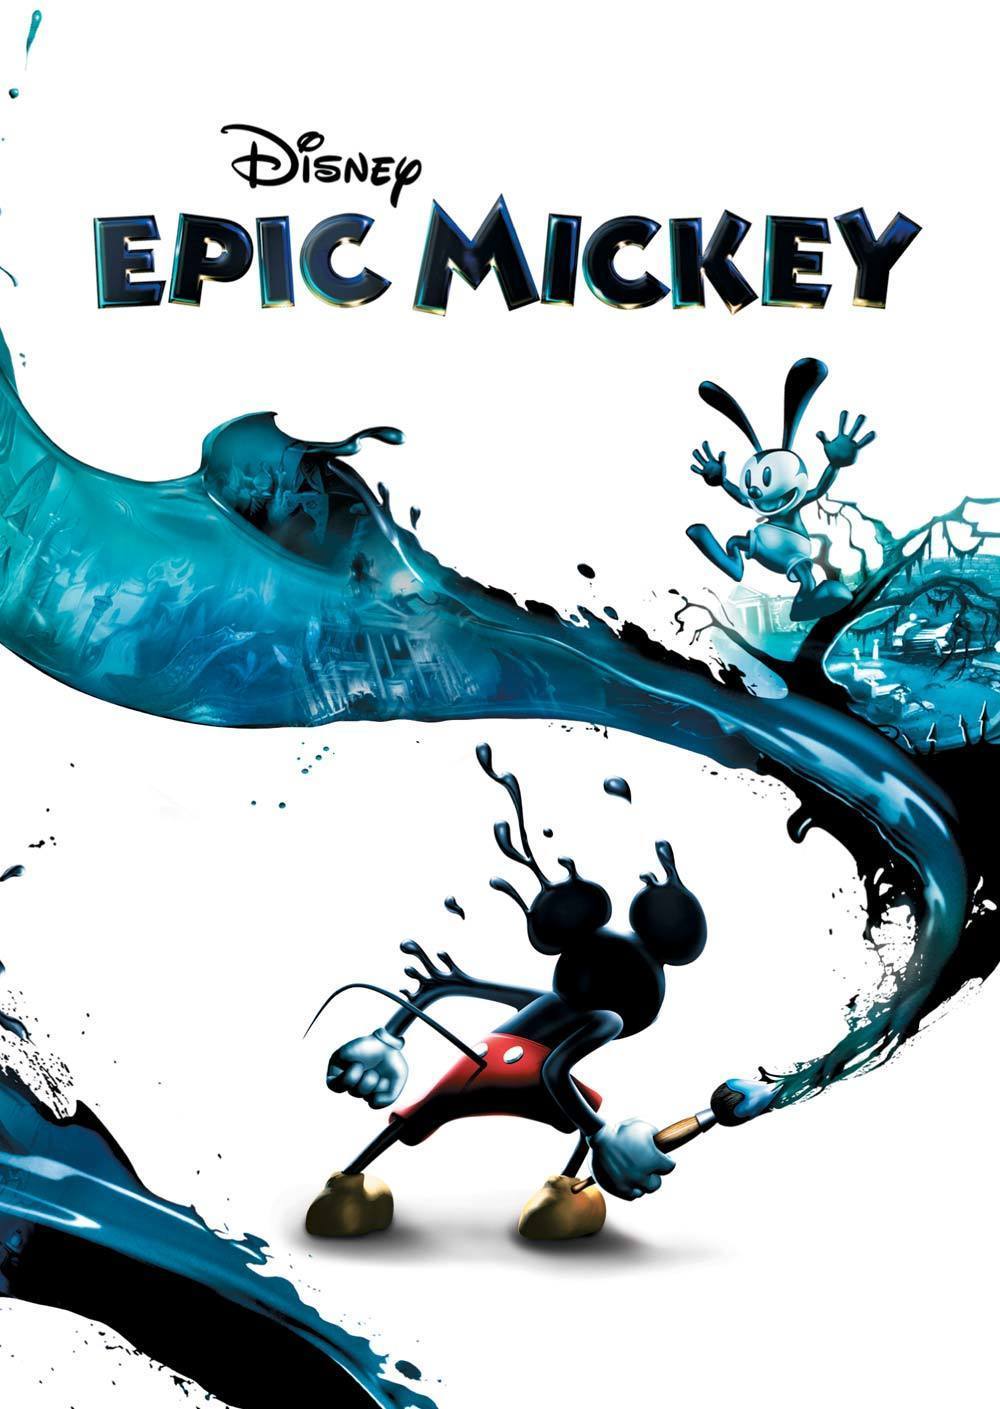 Epic Mickey 1 Pc Download